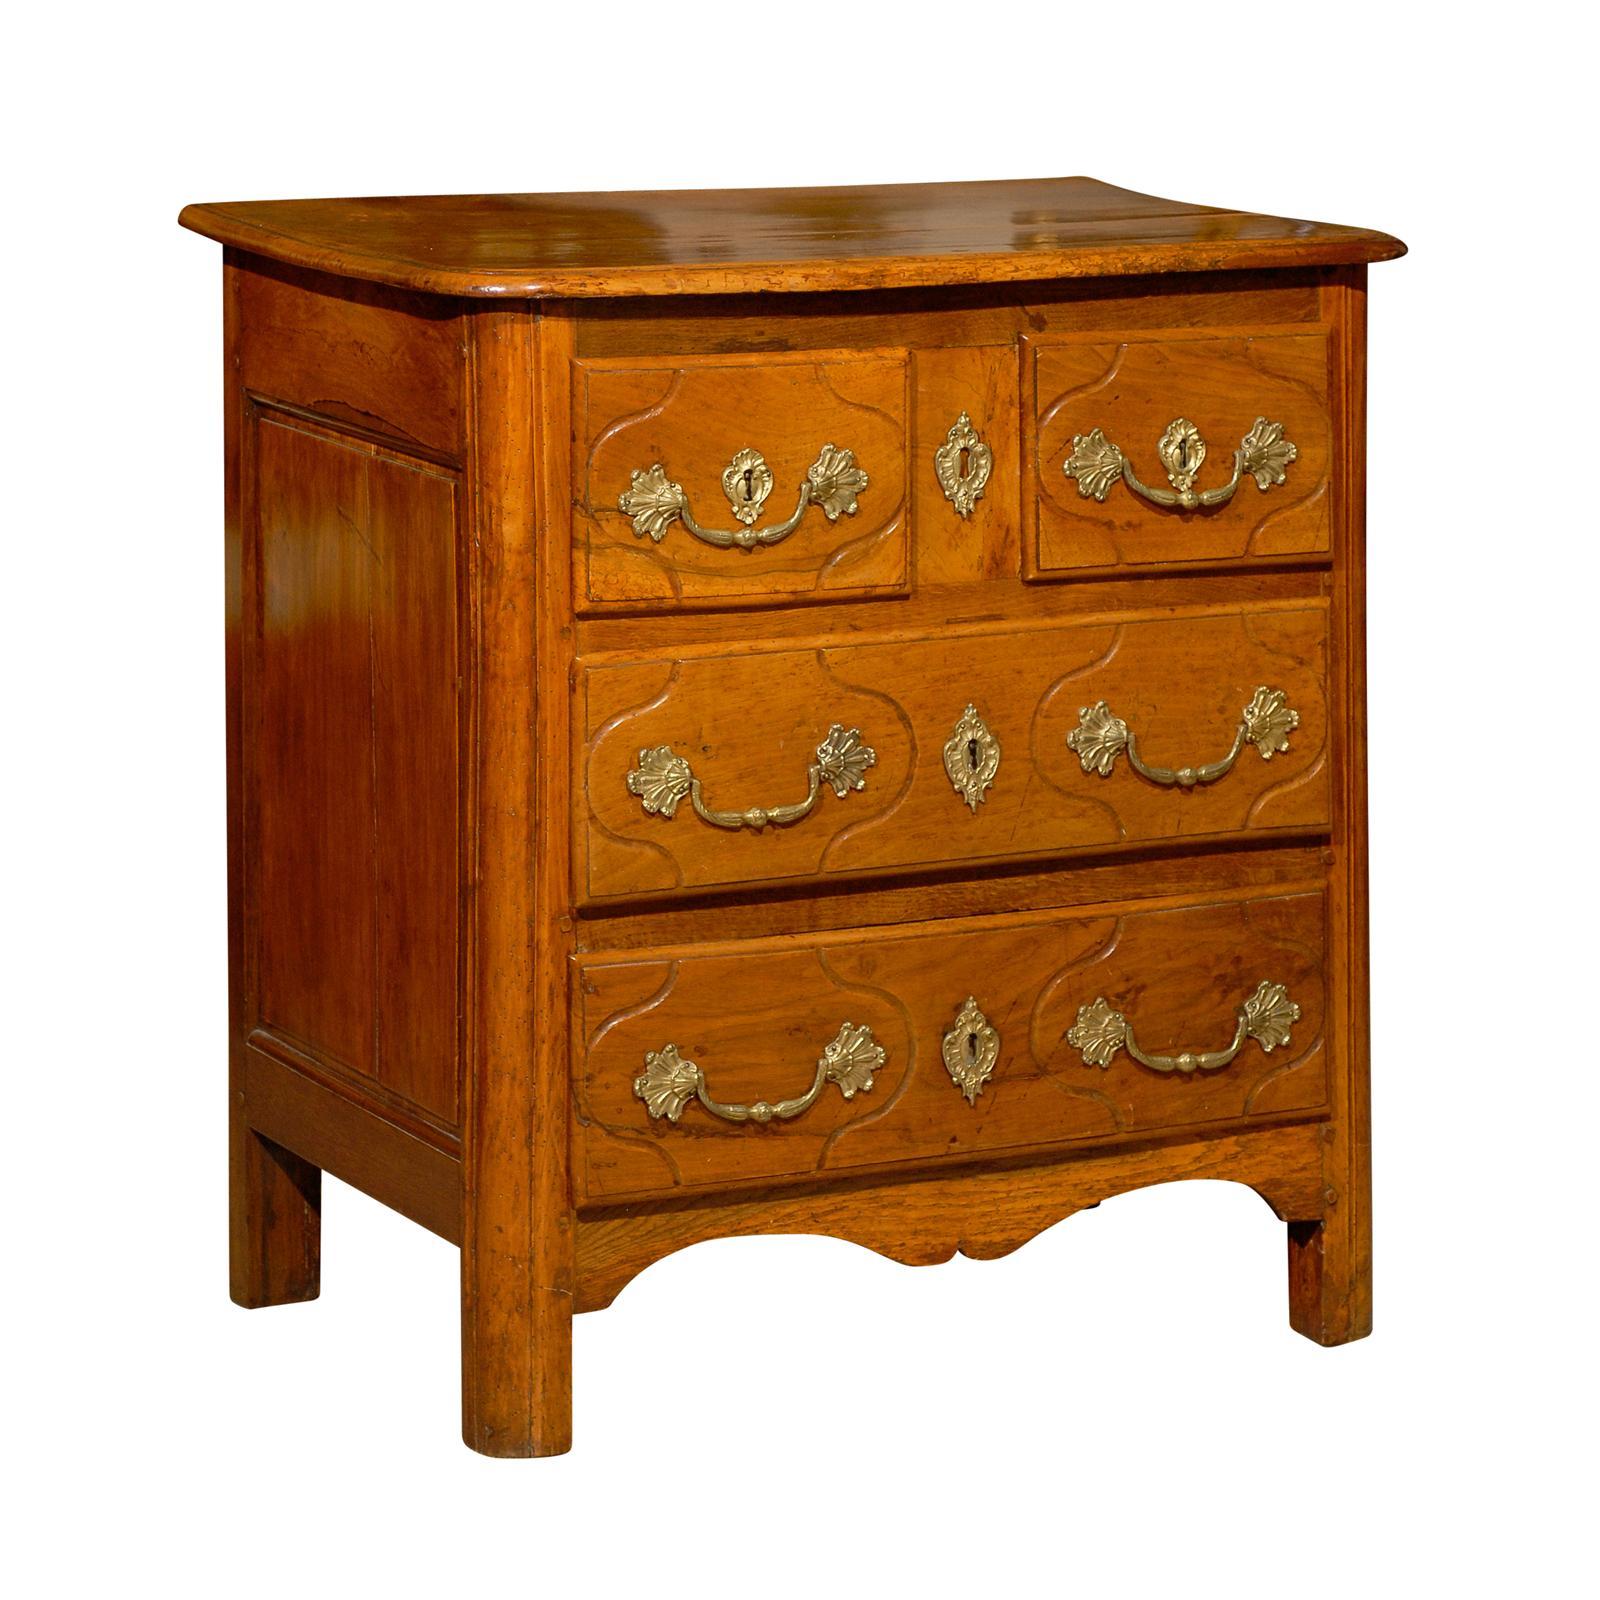 Petite 18th Century French Provincial Walnut Commode